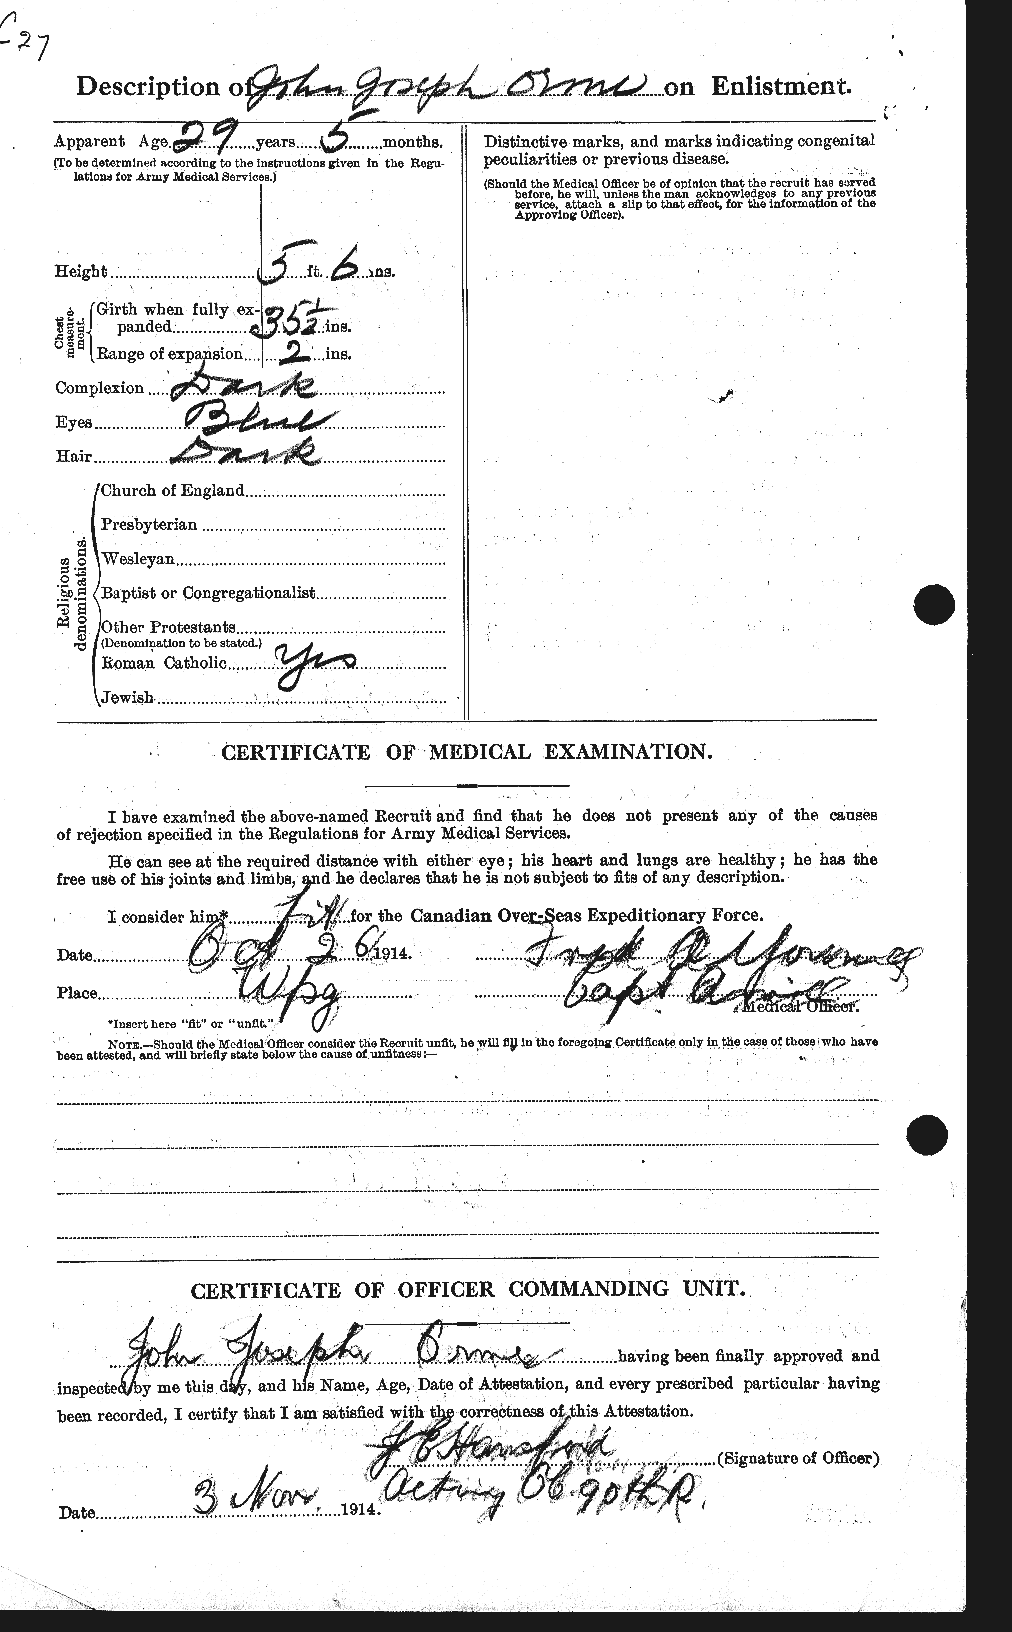 Personnel Records of the First World War - CEF 559636b